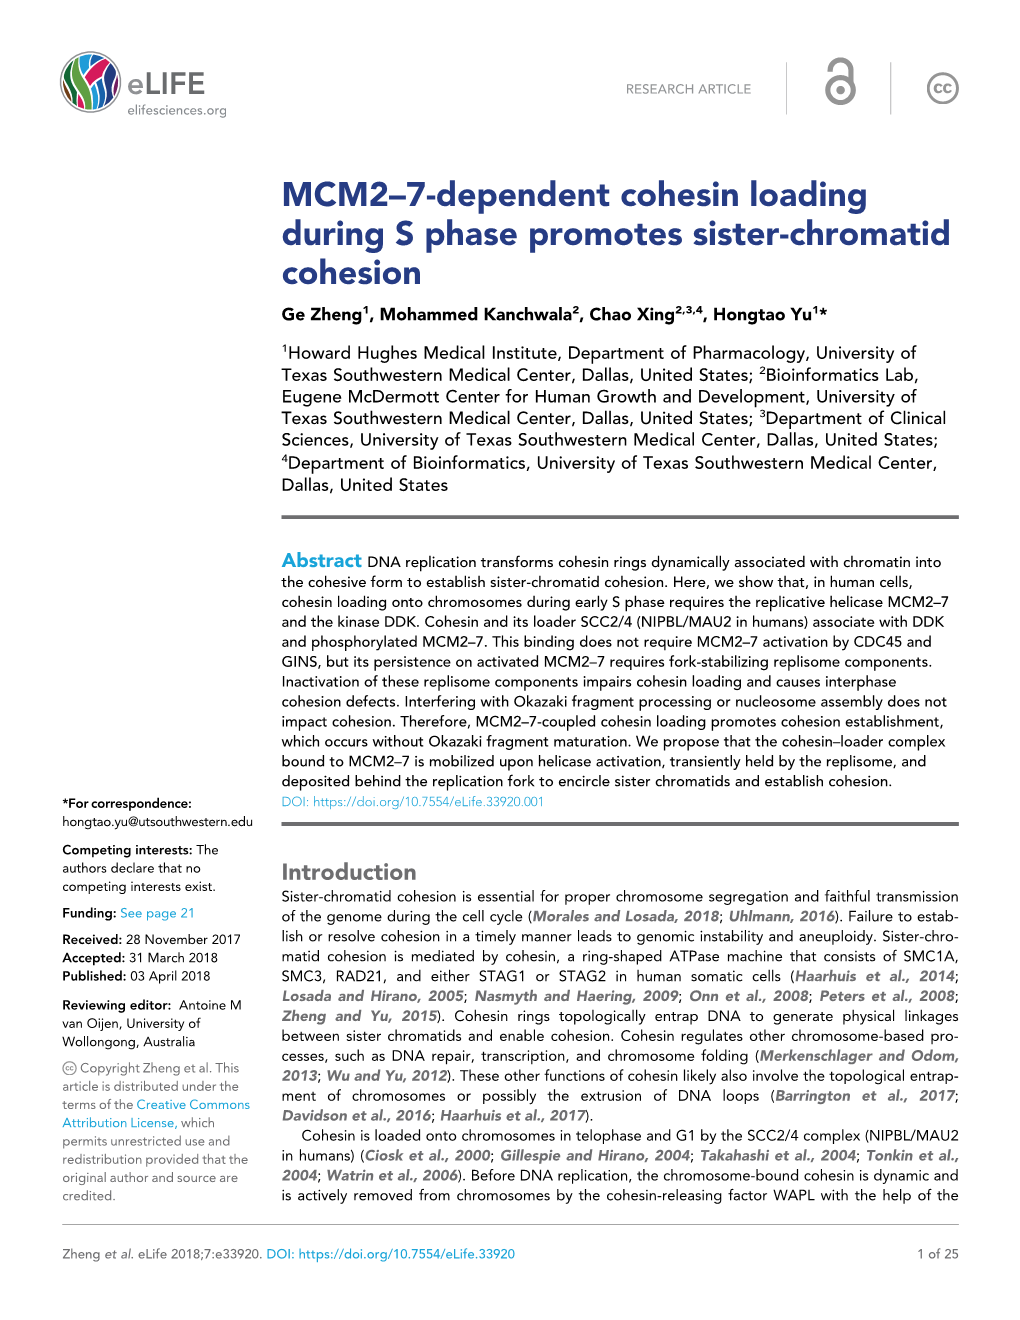 MCM2–7-Dependent Cohesin Loading During S Phase Promotes Sister-Chromatid Cohesion Ge Zheng1, Mohammed Kanchwala2, Chao Xing2,3,4, Hongtao Yu1*